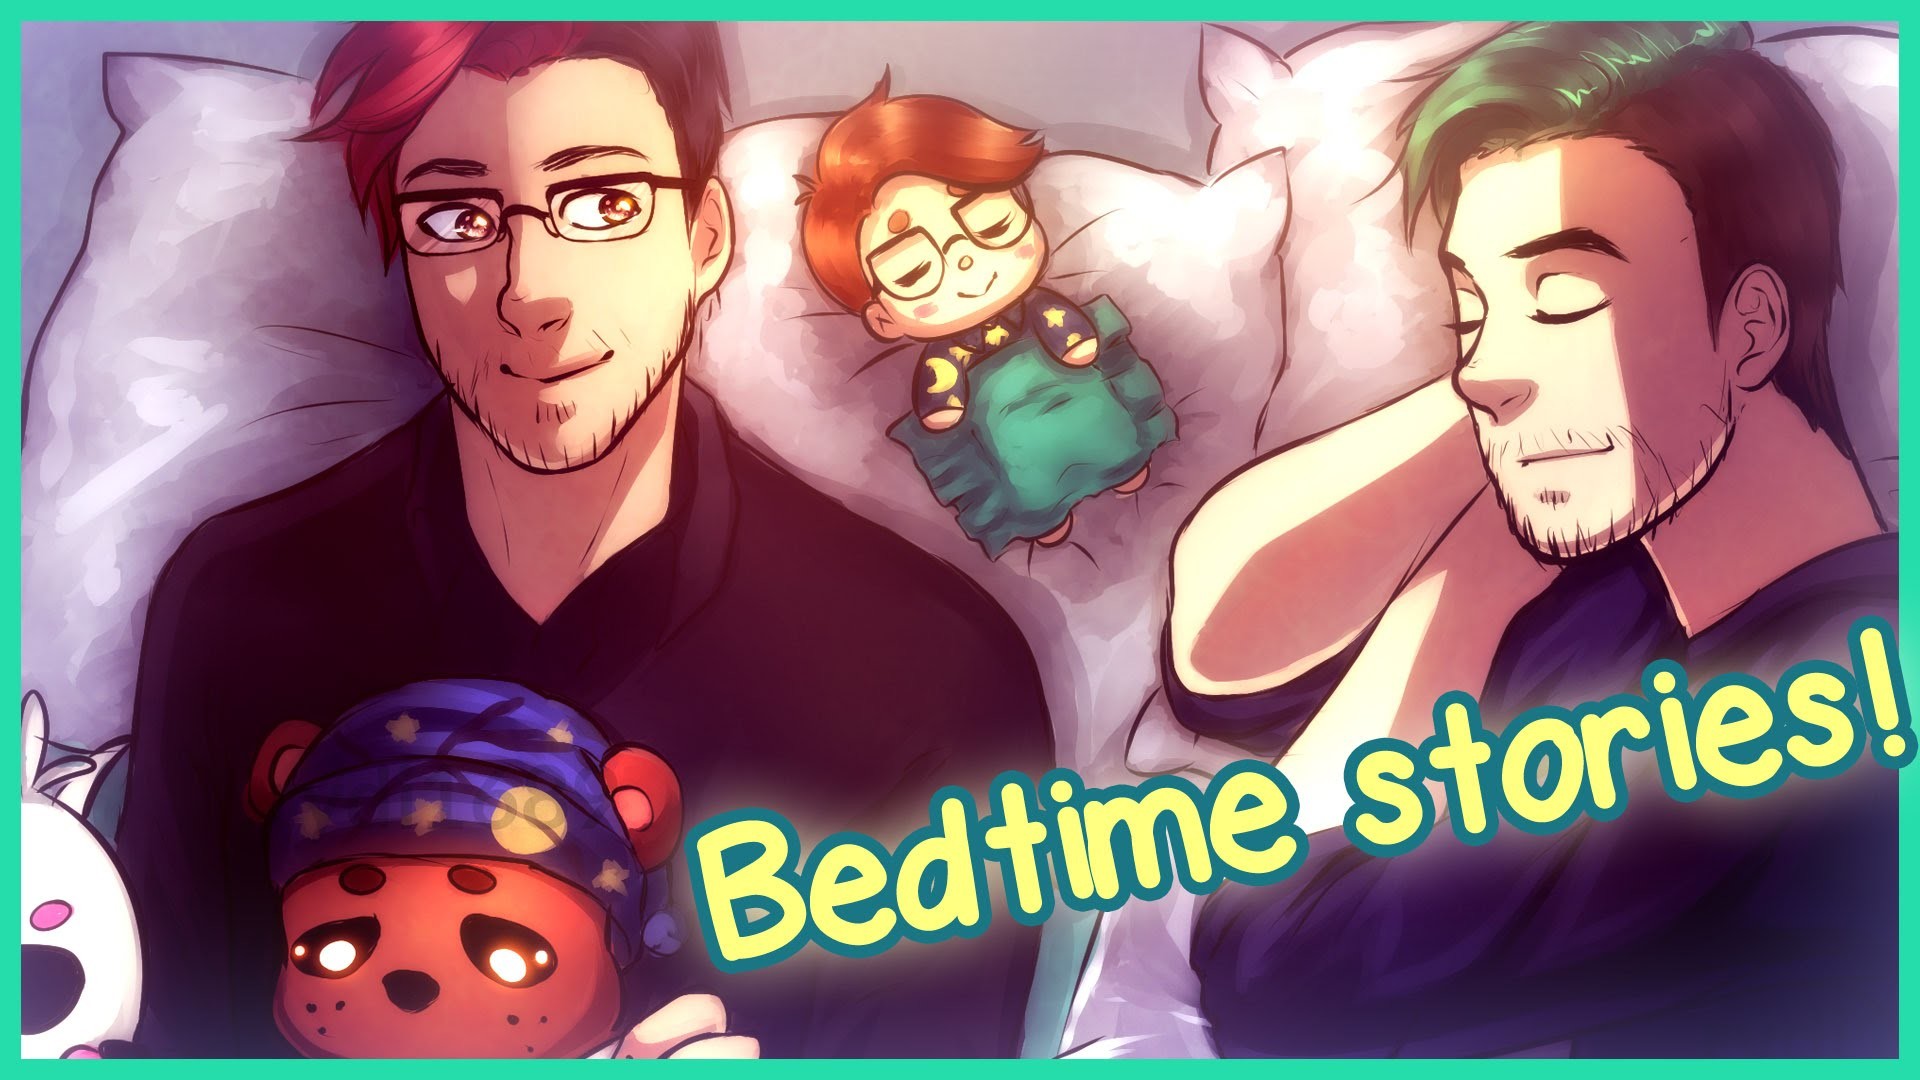 1920x1080 Markiplier and Jacksepticeye fanart | Bedtime Stories with Five Nights at  Freddy's | SAI Speedpaint - YouTube